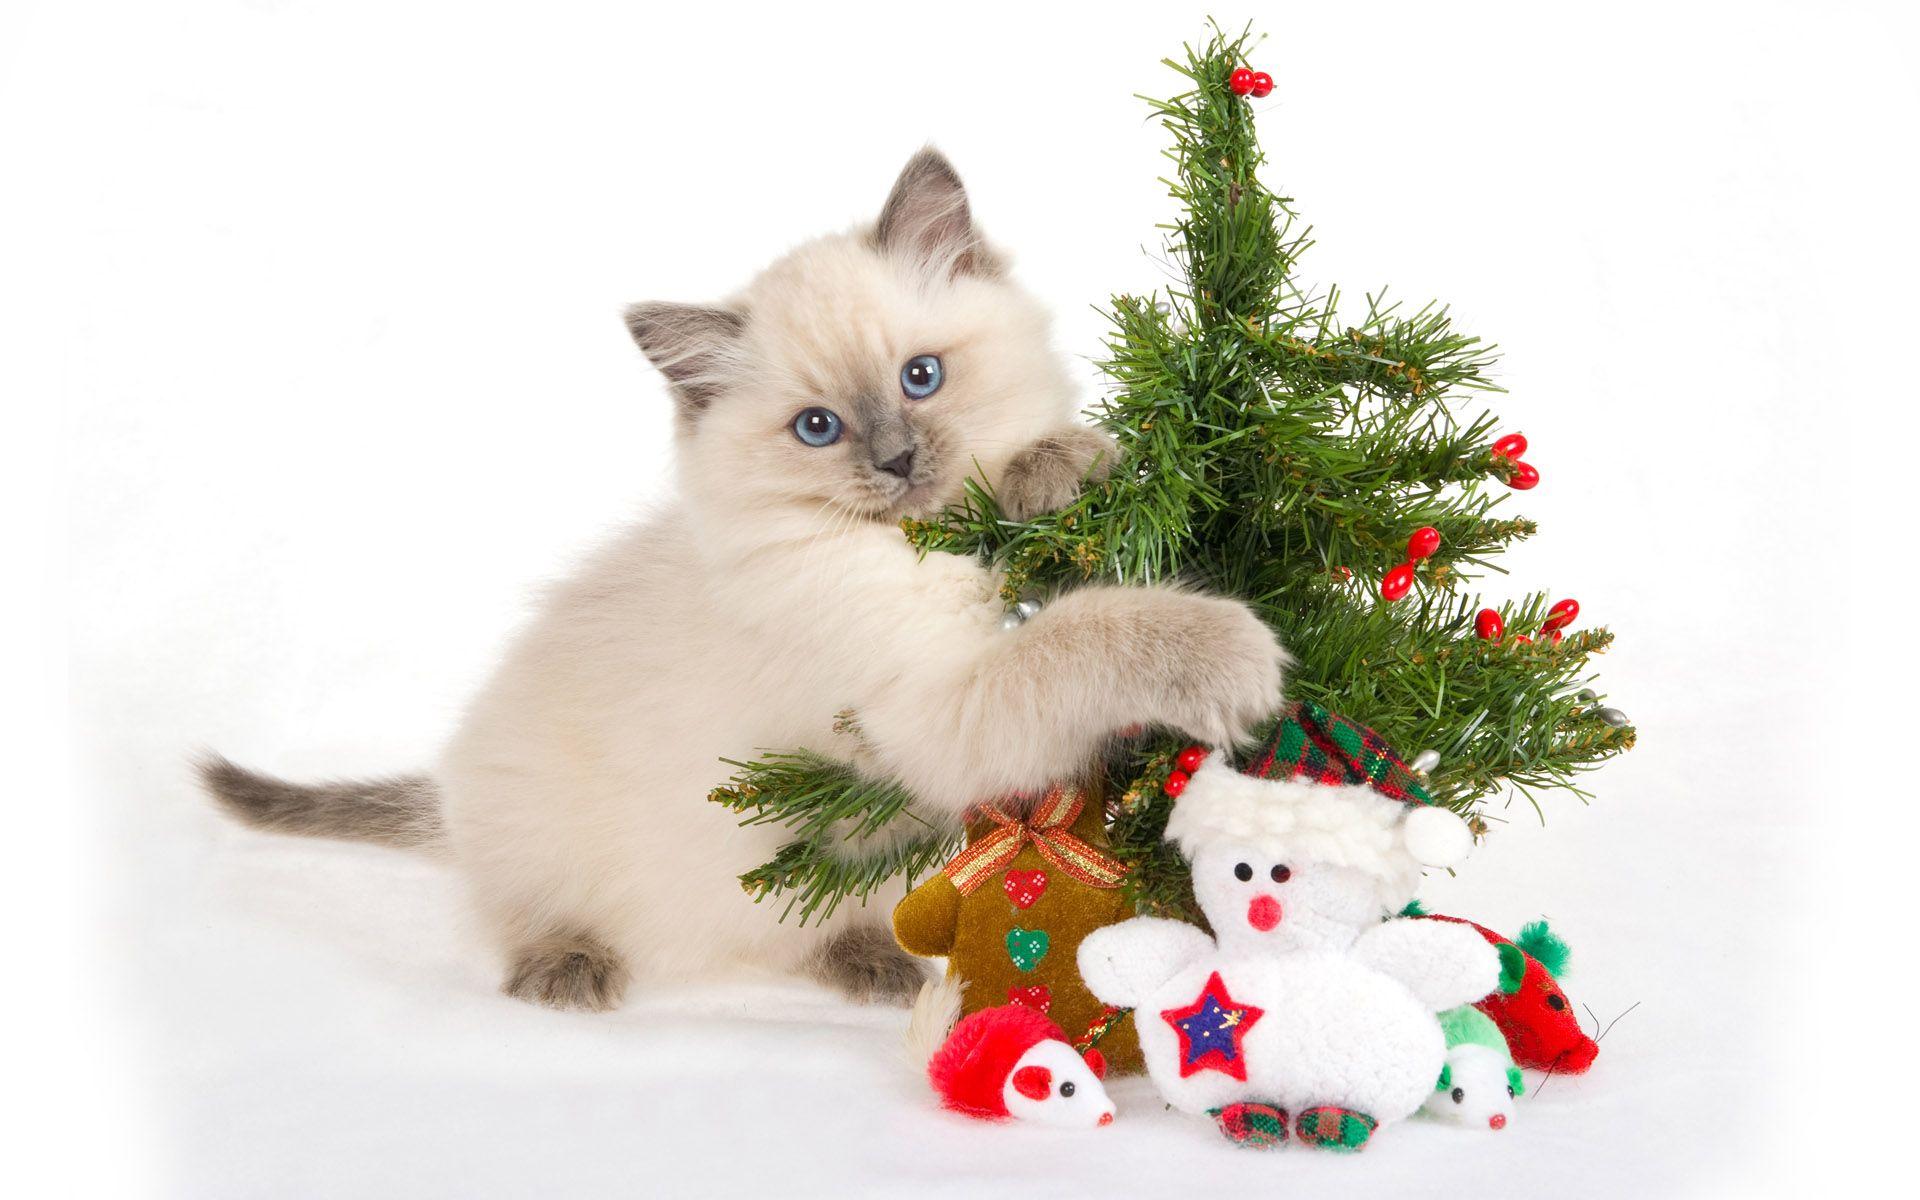 Cat with Christmas tree wallpaper. Cat with Christmas tree stock